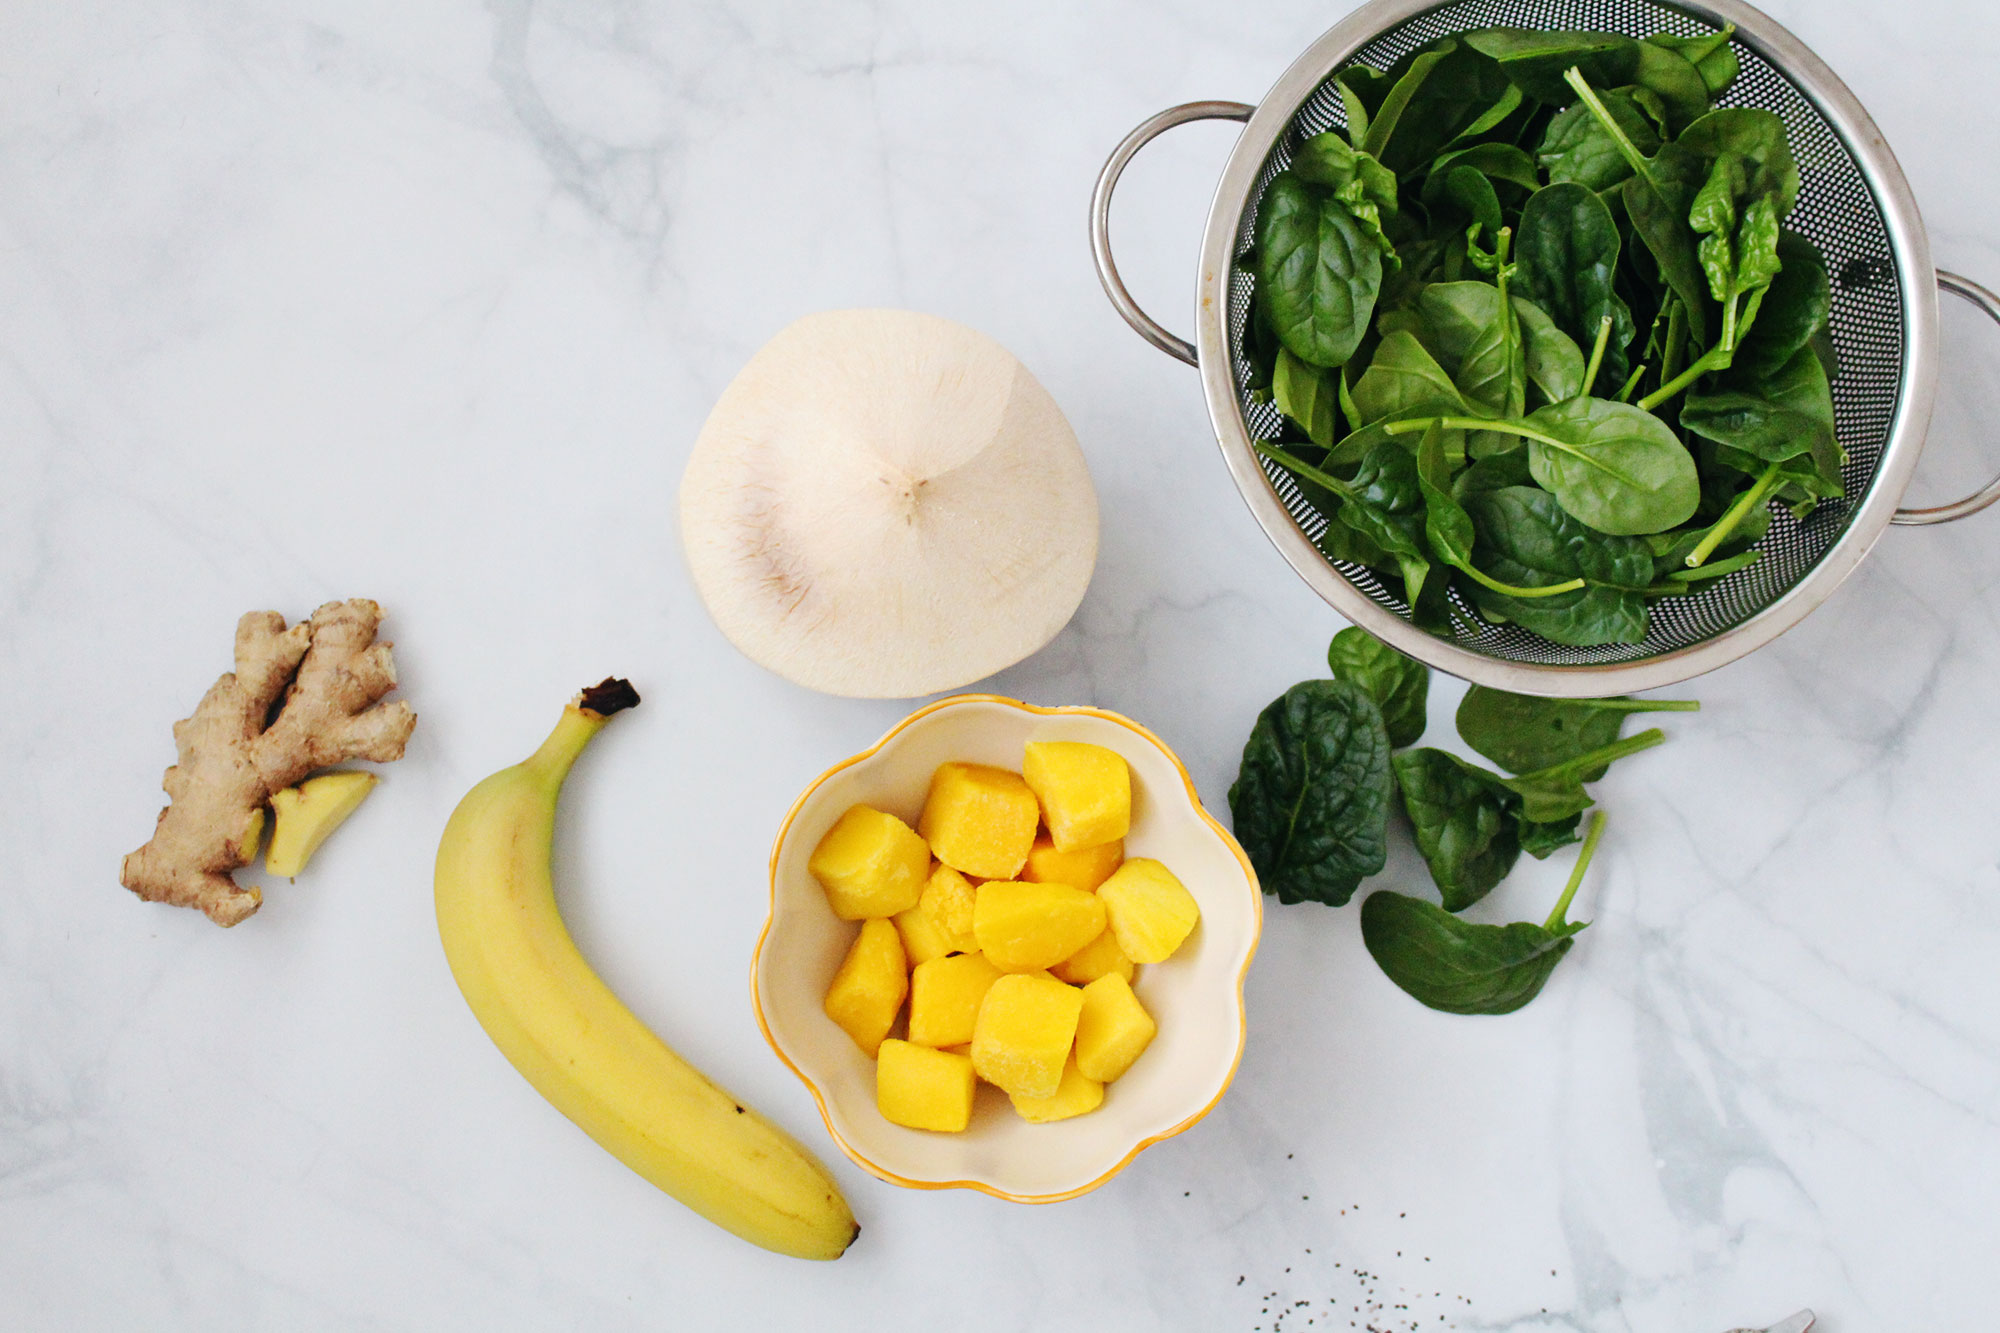 Ingredients for an amazing green smoothie: fresh ginger, banana, frozen mango, young coconut, spinach, and chia seeds